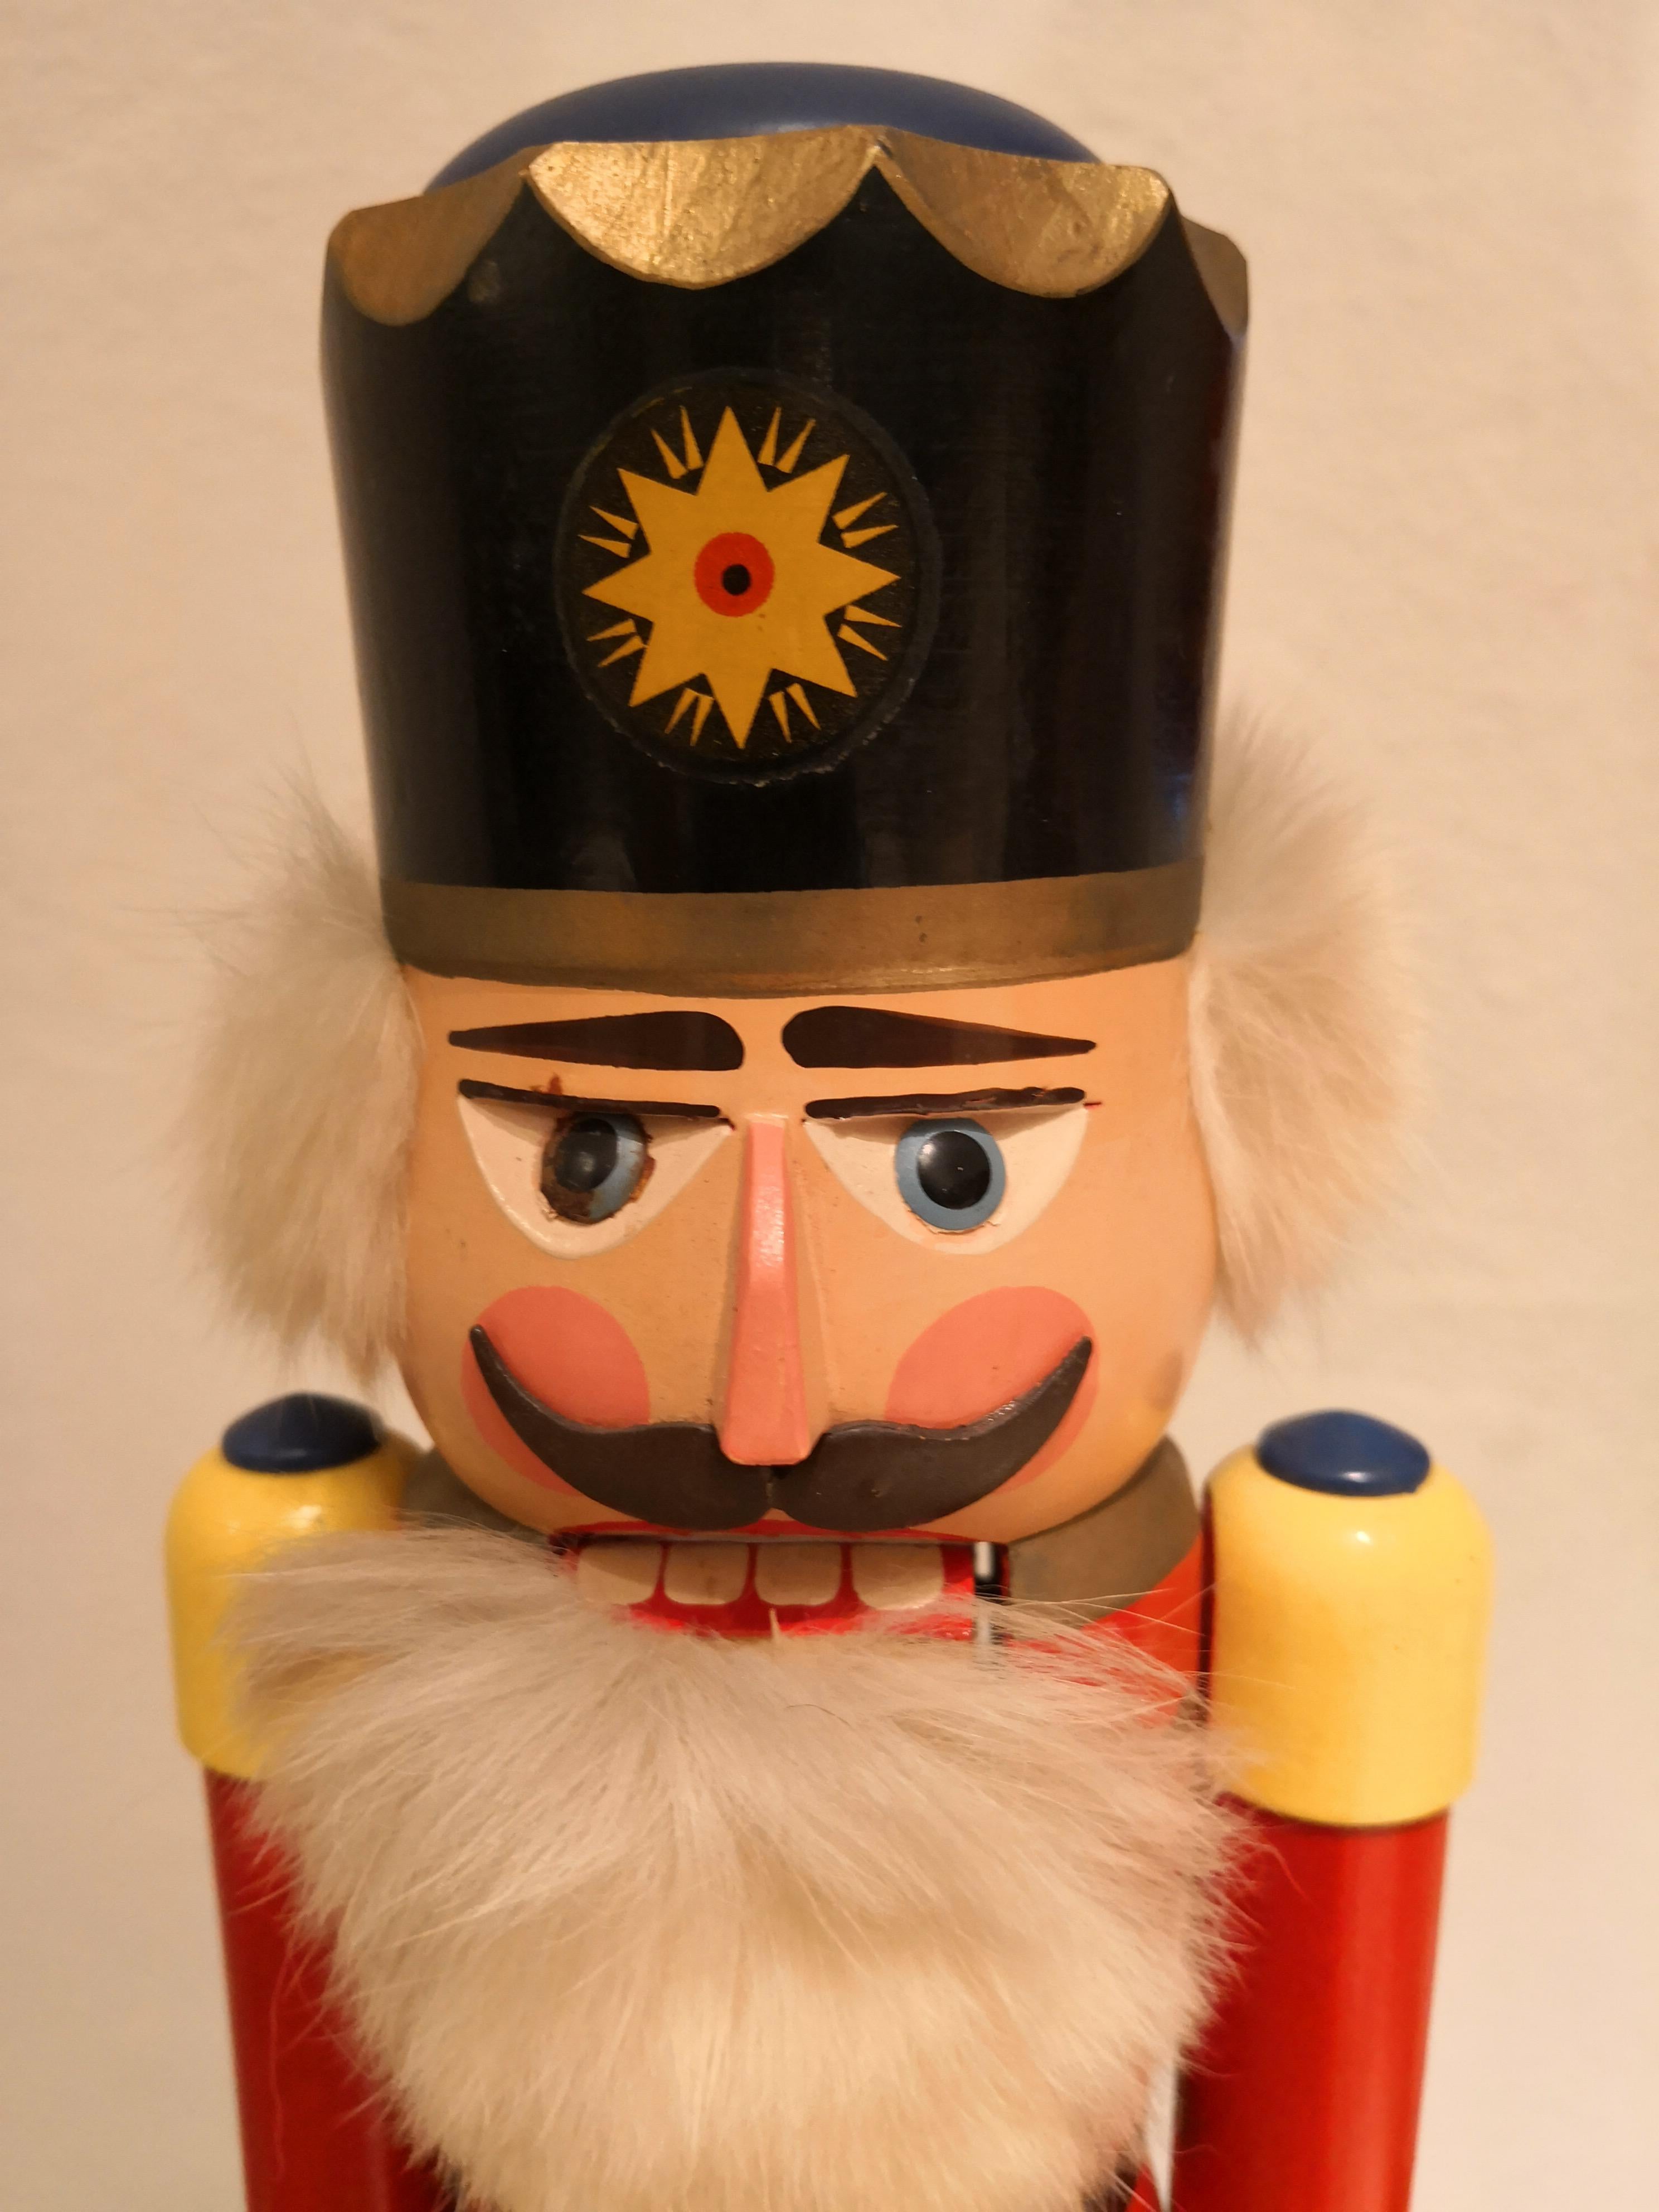 Large wooden nutcracker figure from the Erzgebirge. The region Erzgebirge formerly Eastern Germany is famous for this special kind of nutcrackers, where intricate carving has been their home. Completely hand-painted in bright colors and decorated